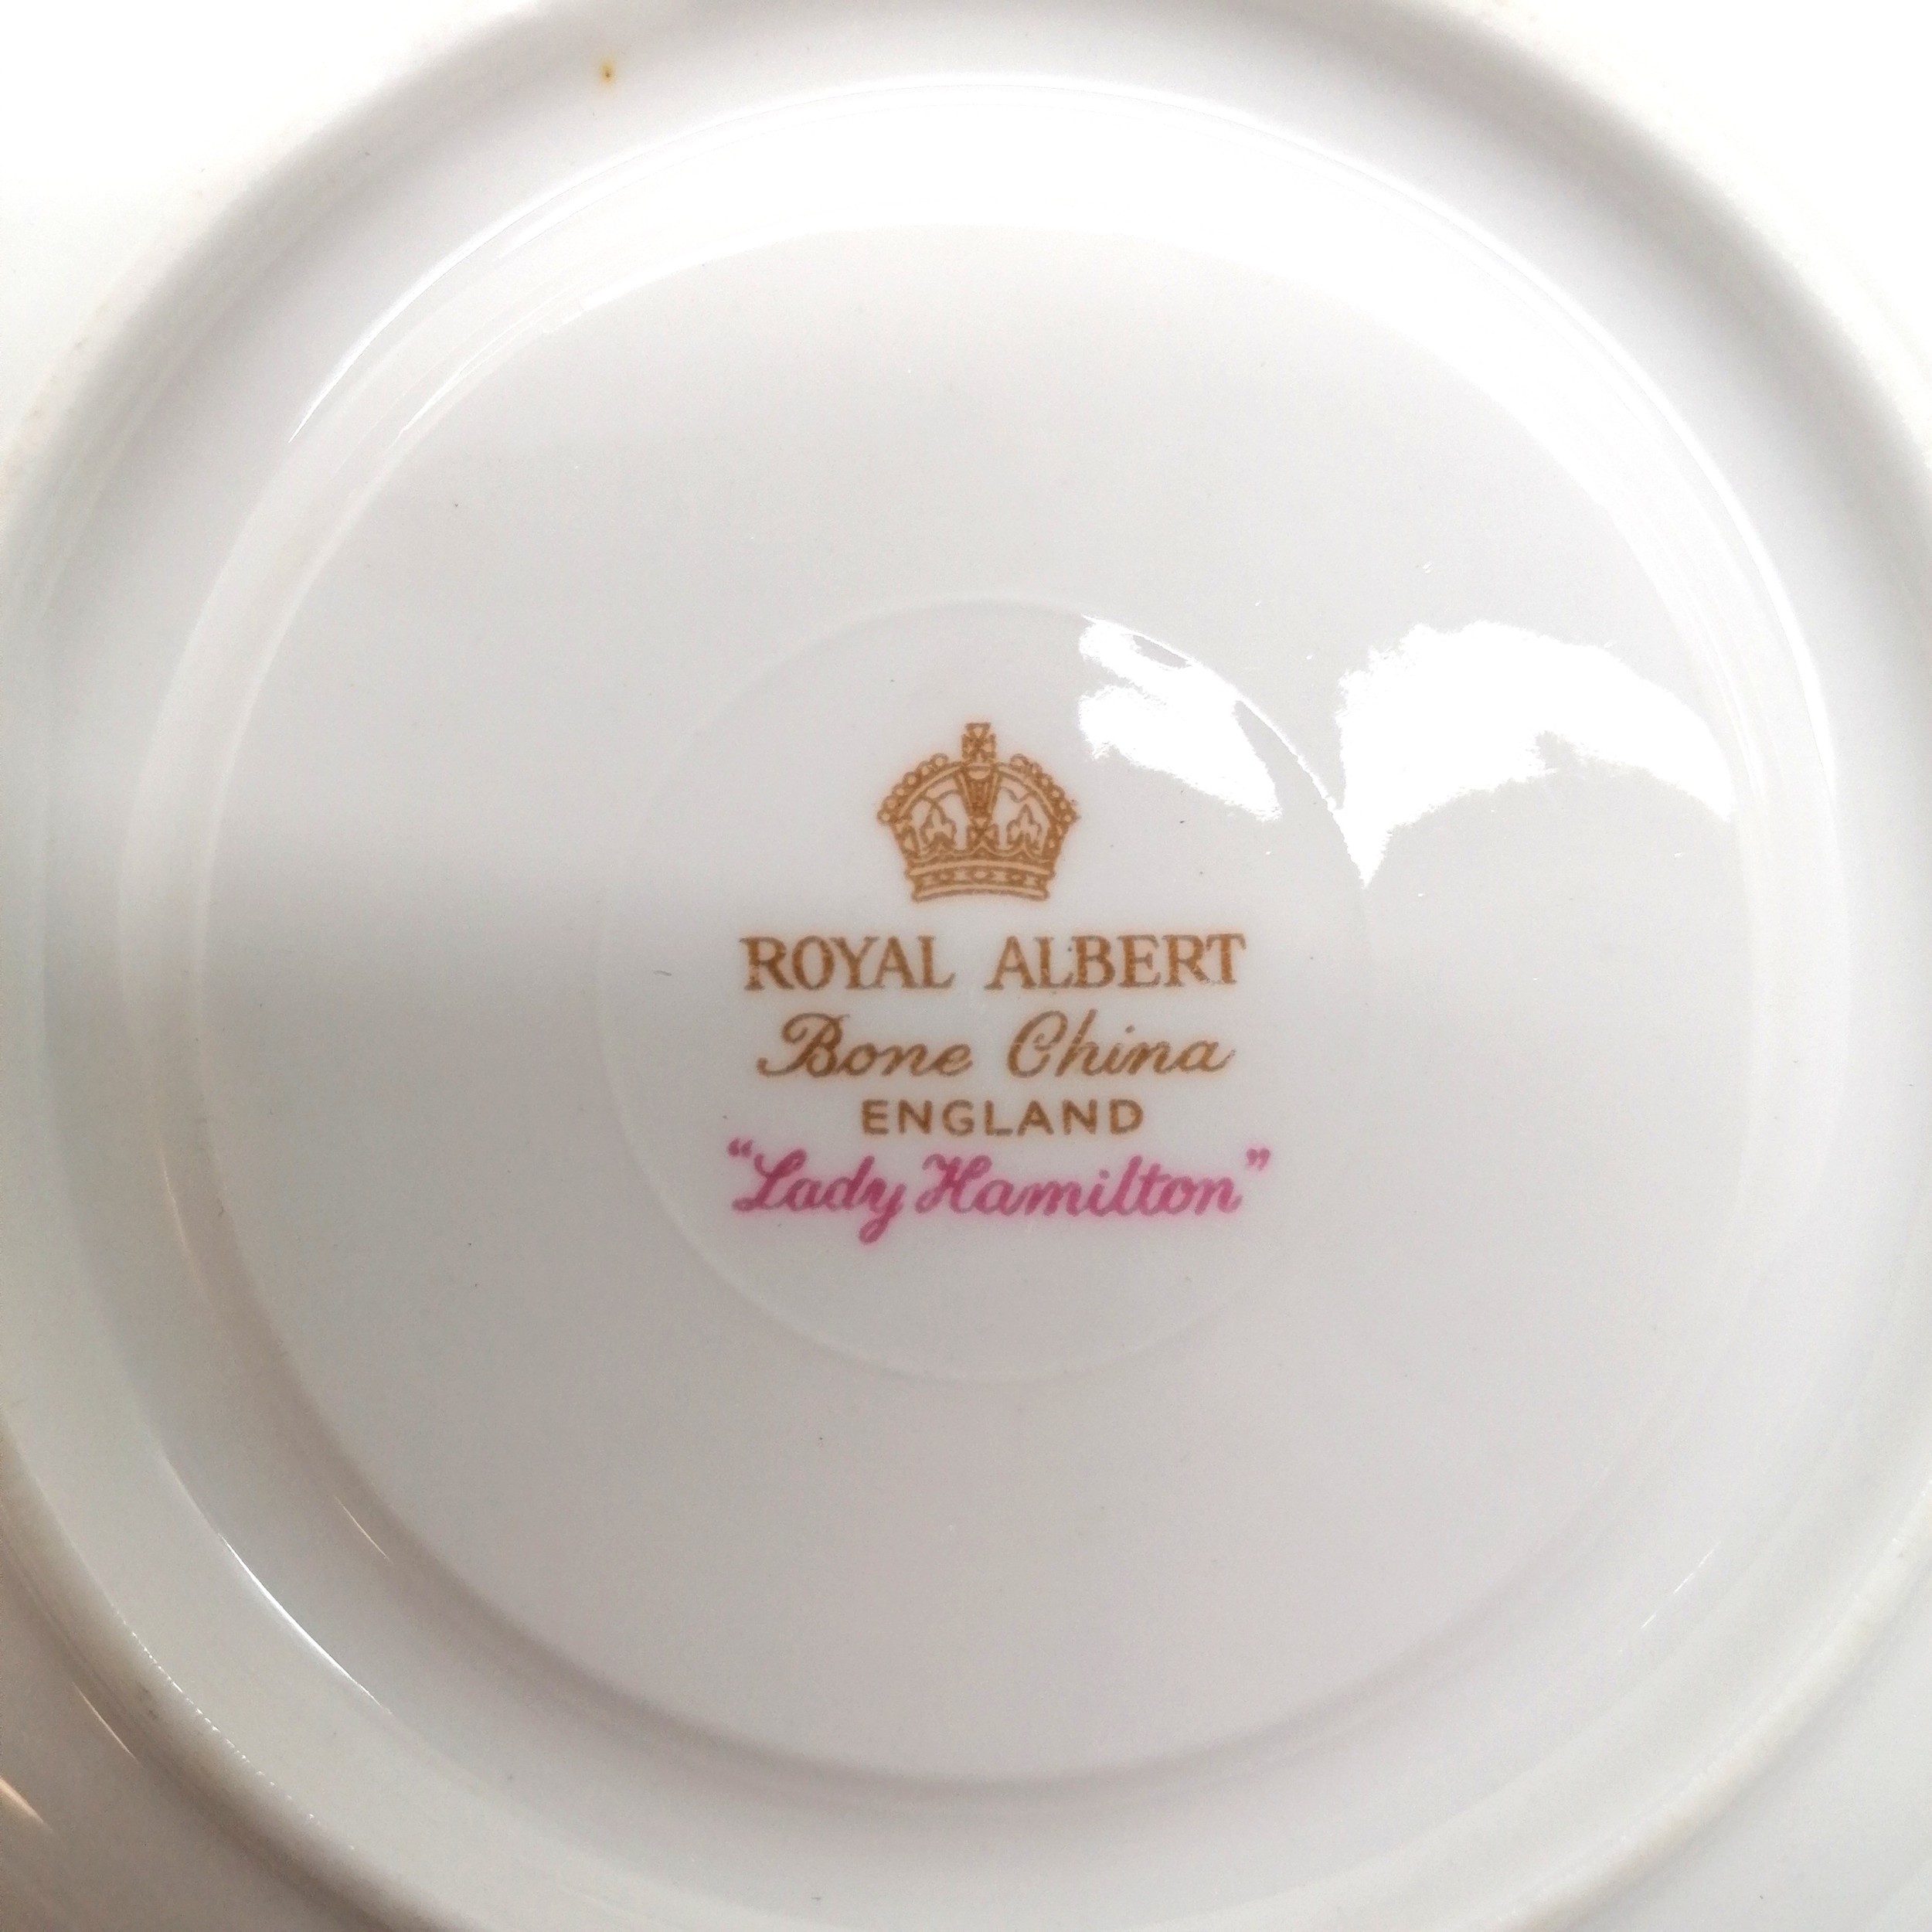 Royal Albert Tea service in the Lady Hamilton pattern, 1 cup missing, in good used condition, t/w - Image 3 of 4